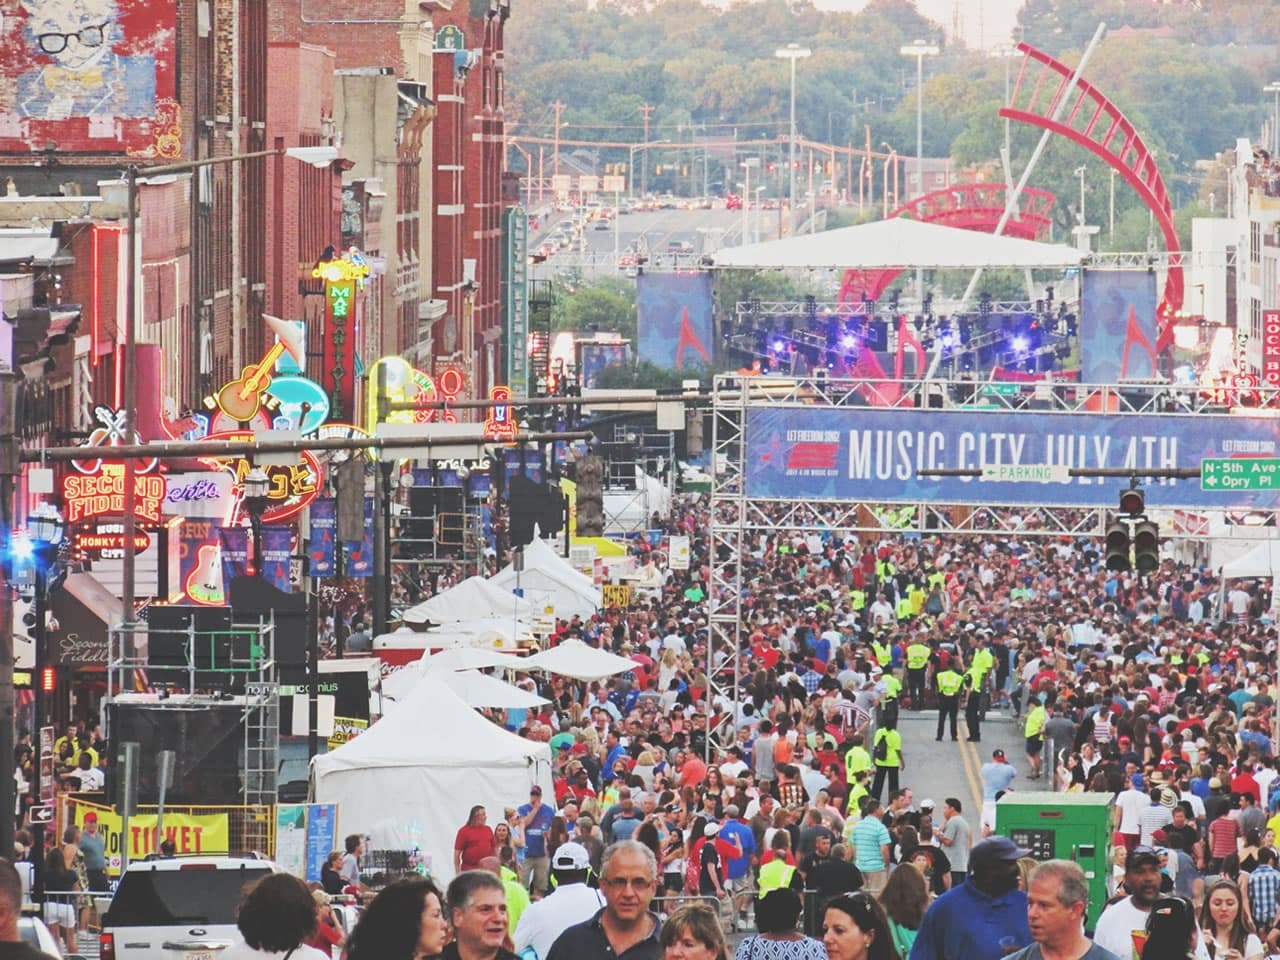 Solaren Provides Security & Event Staff for Record Breaking 4th of July Event in Downtown Nashville